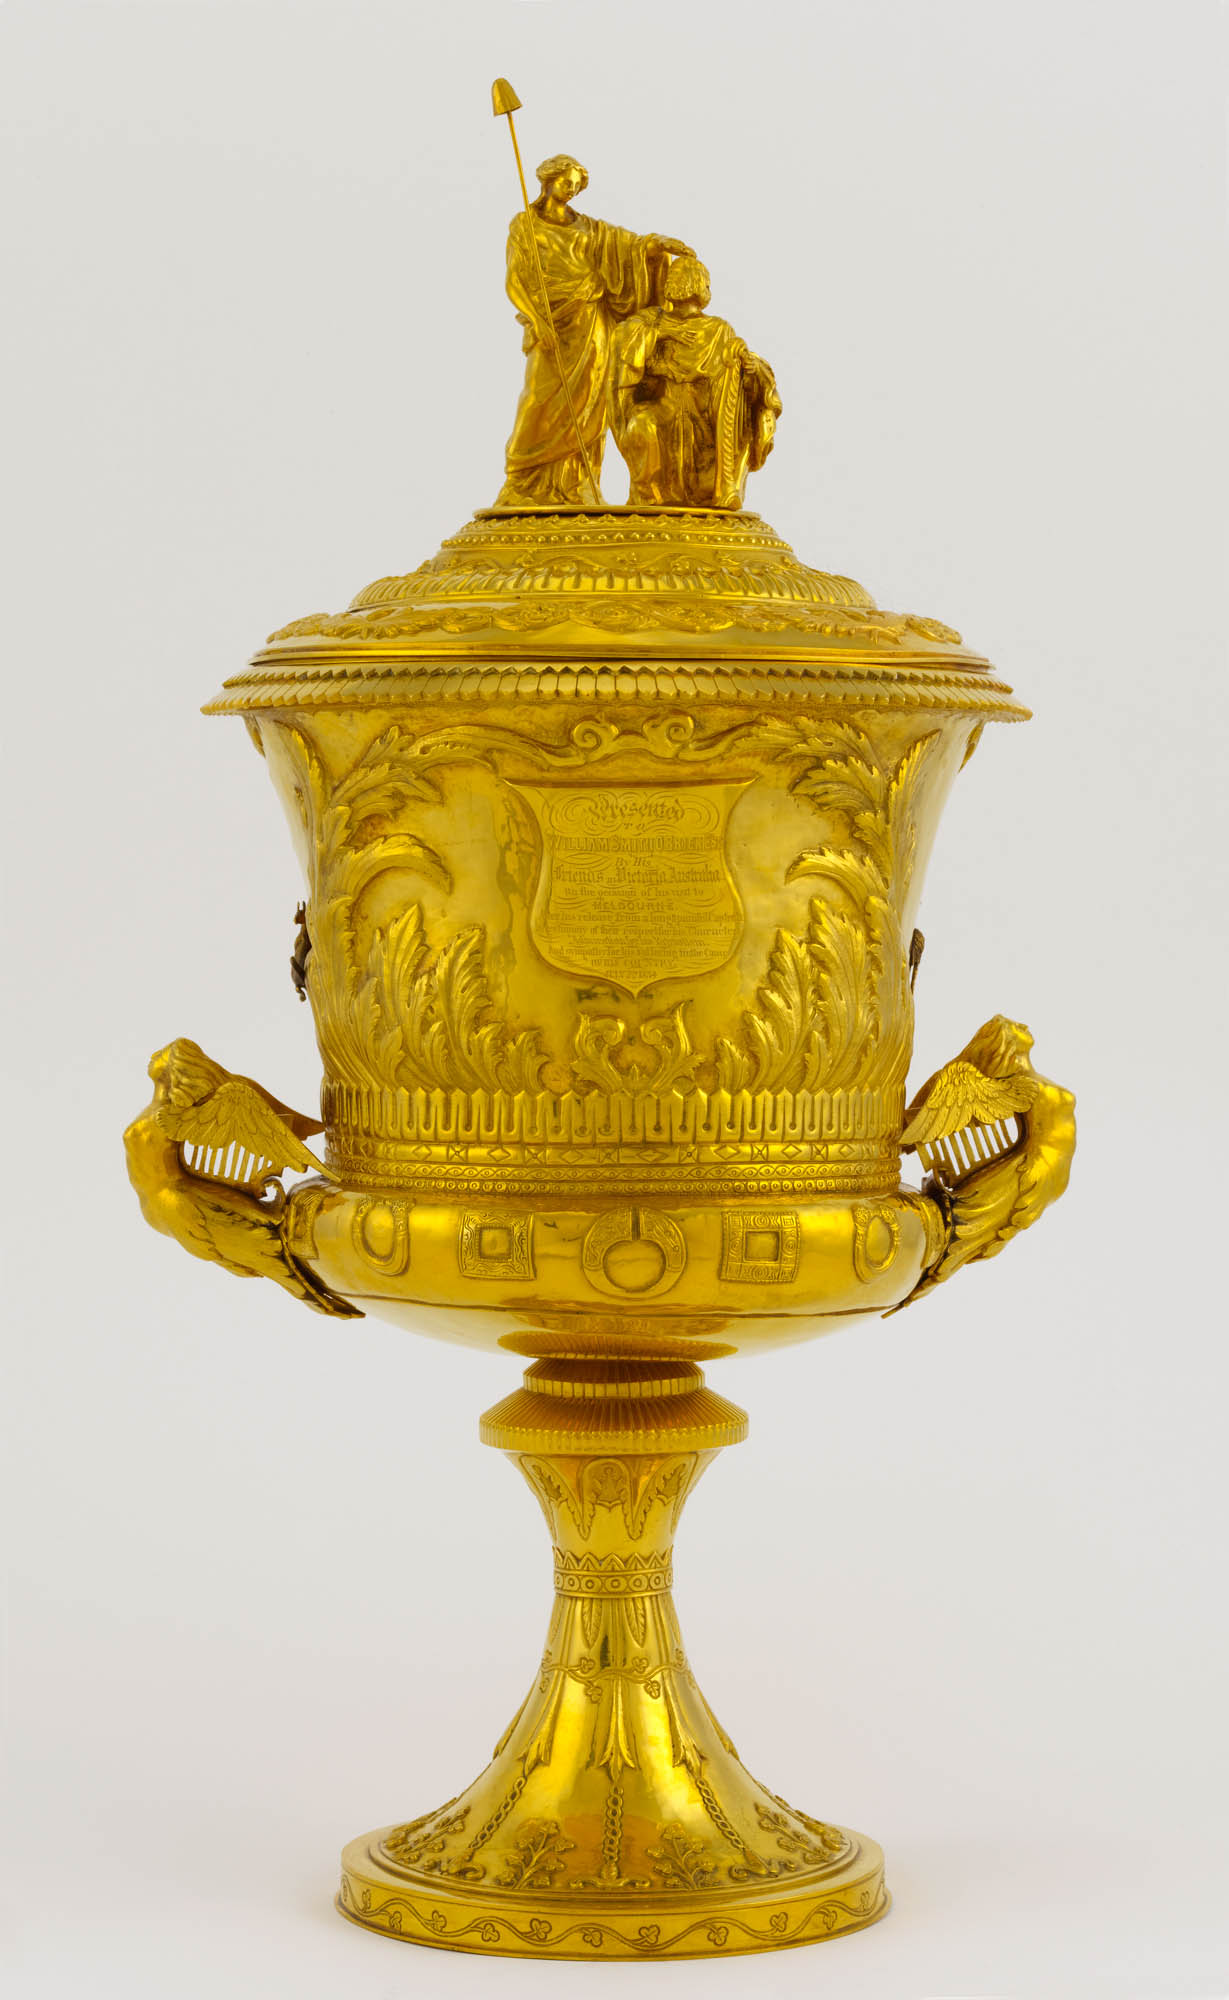 Gold cup in the shape of a trophy with two handles in the shape of winged female figures. On the lid, there are two figures of a woman touching the top of a kneeling man's head.